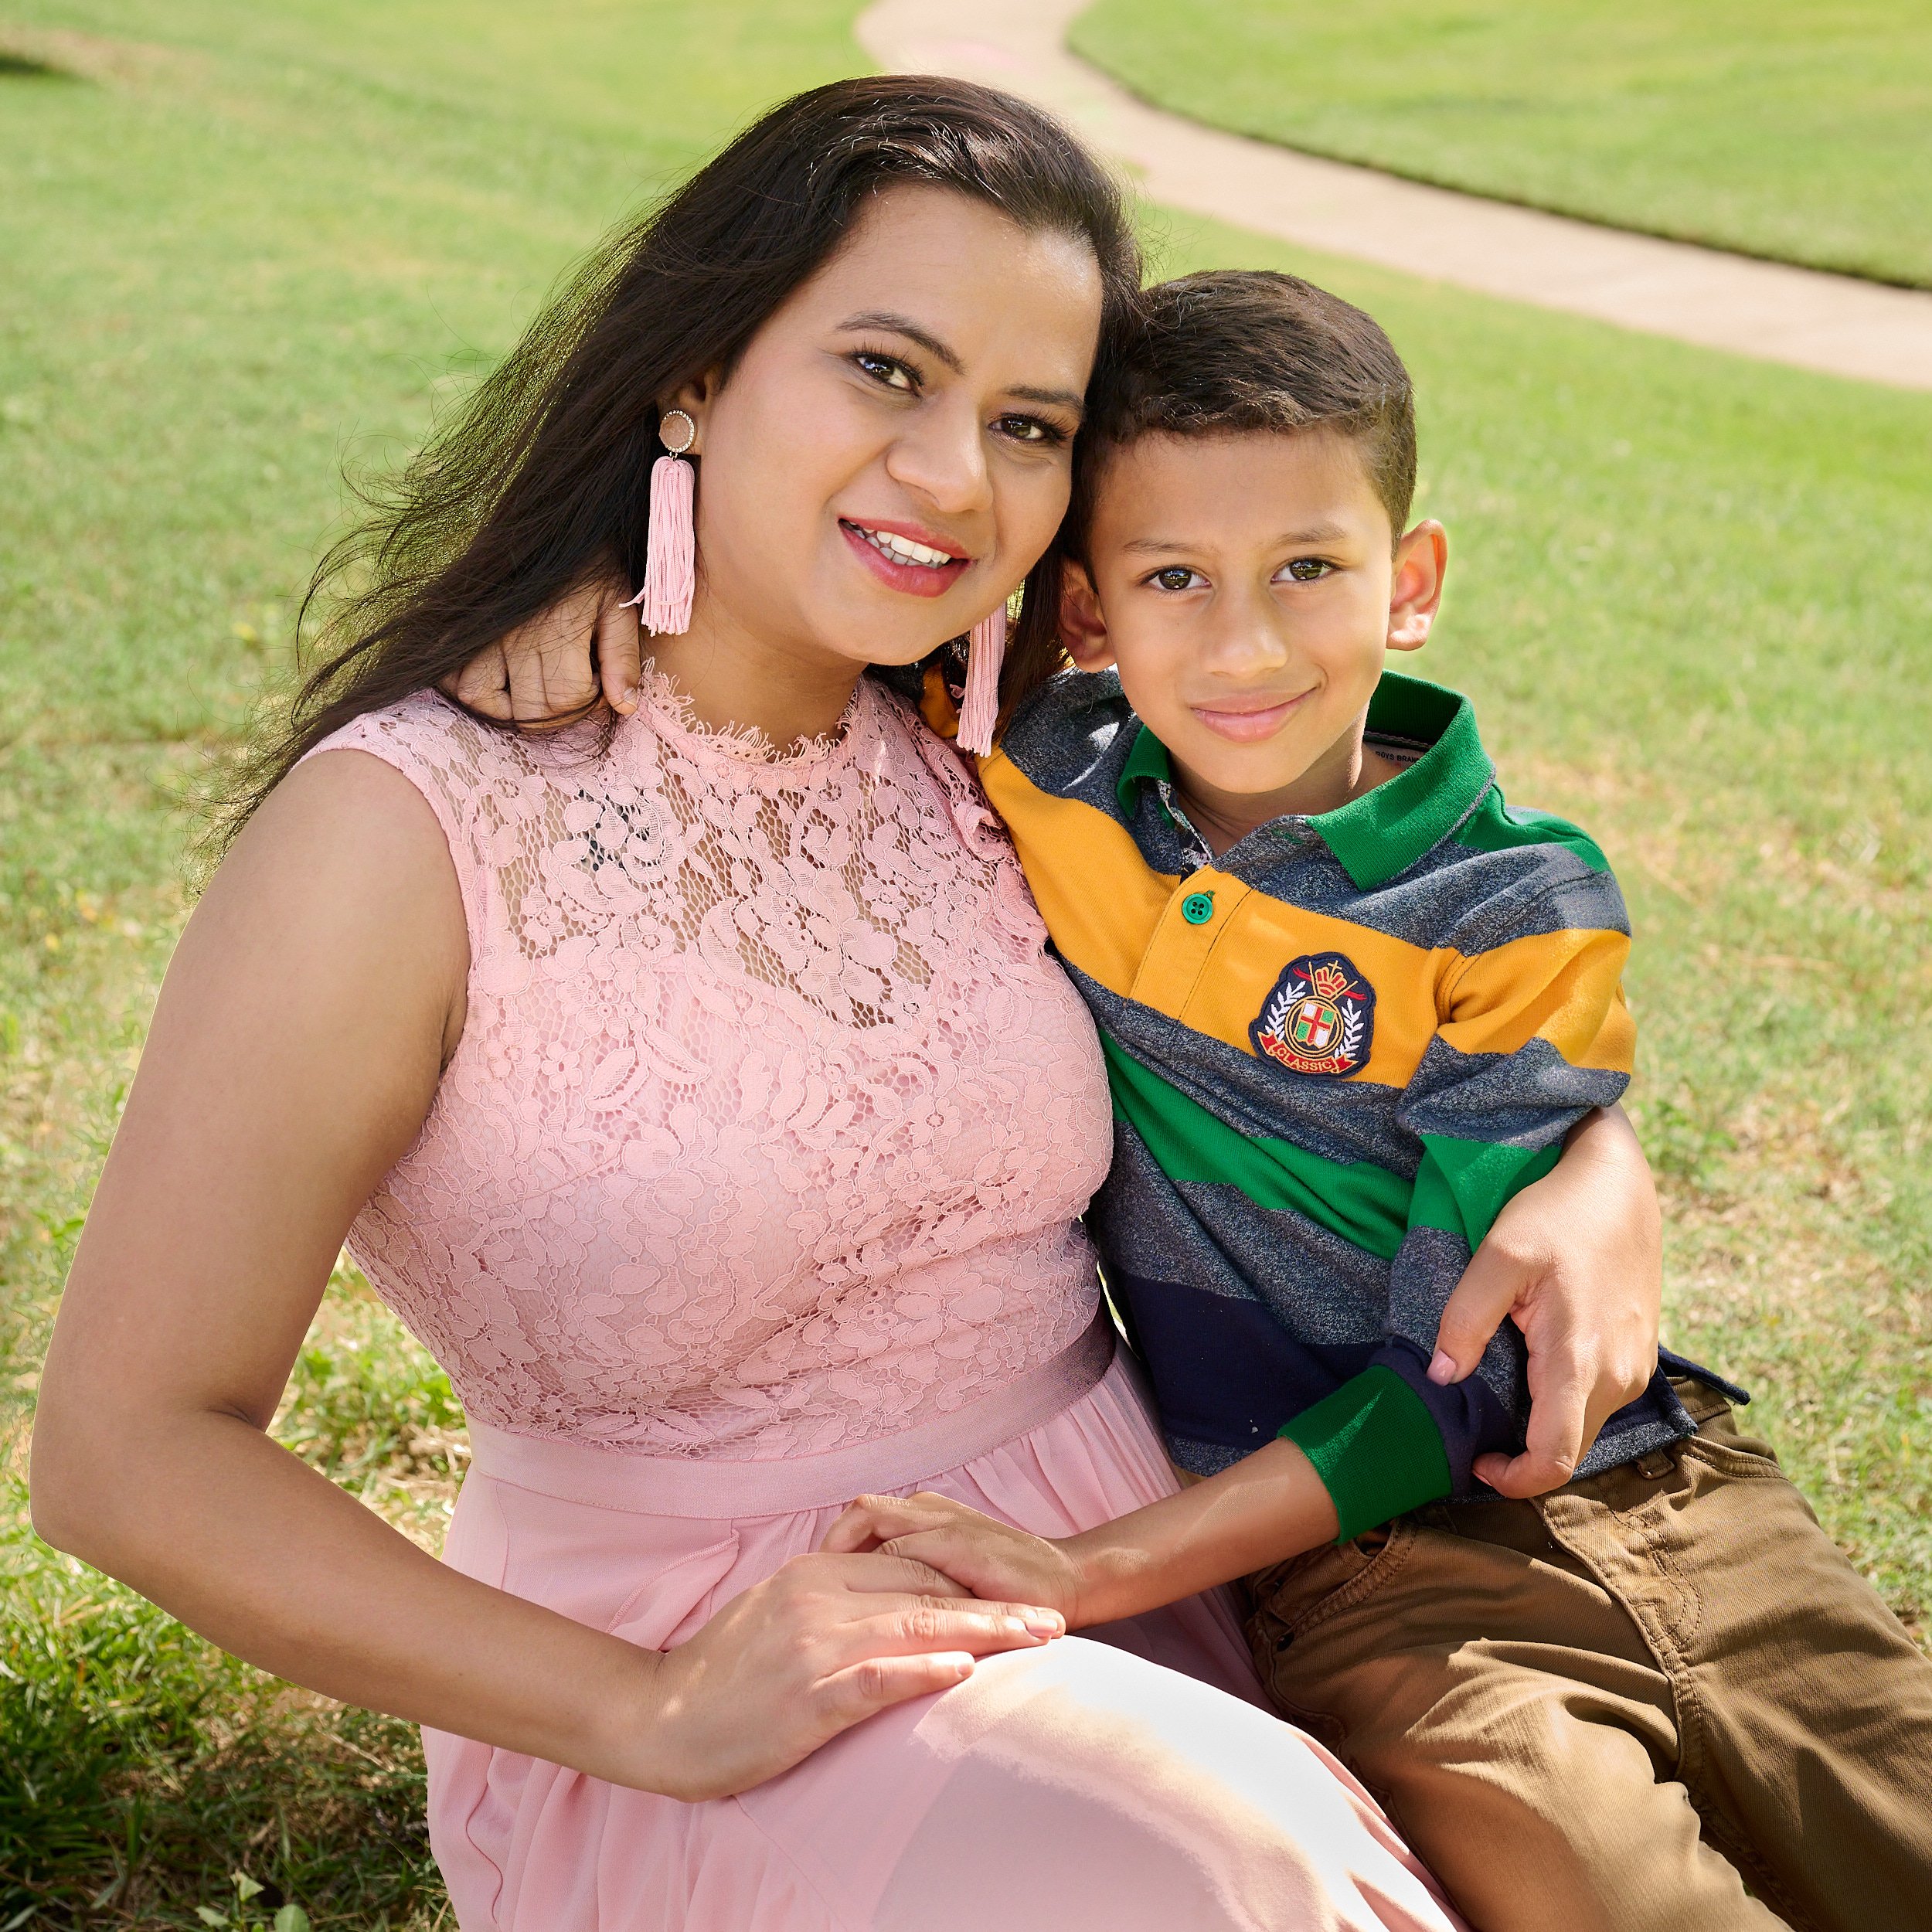  CYPRESS, TEXAS - SEPTEMBER 17TH 2022: a photo session at Cypress Creek Lakes Park on a hot and sunny summer day. Ragini Deore is posing for their annual family portraits for Christmas cards & wall art 